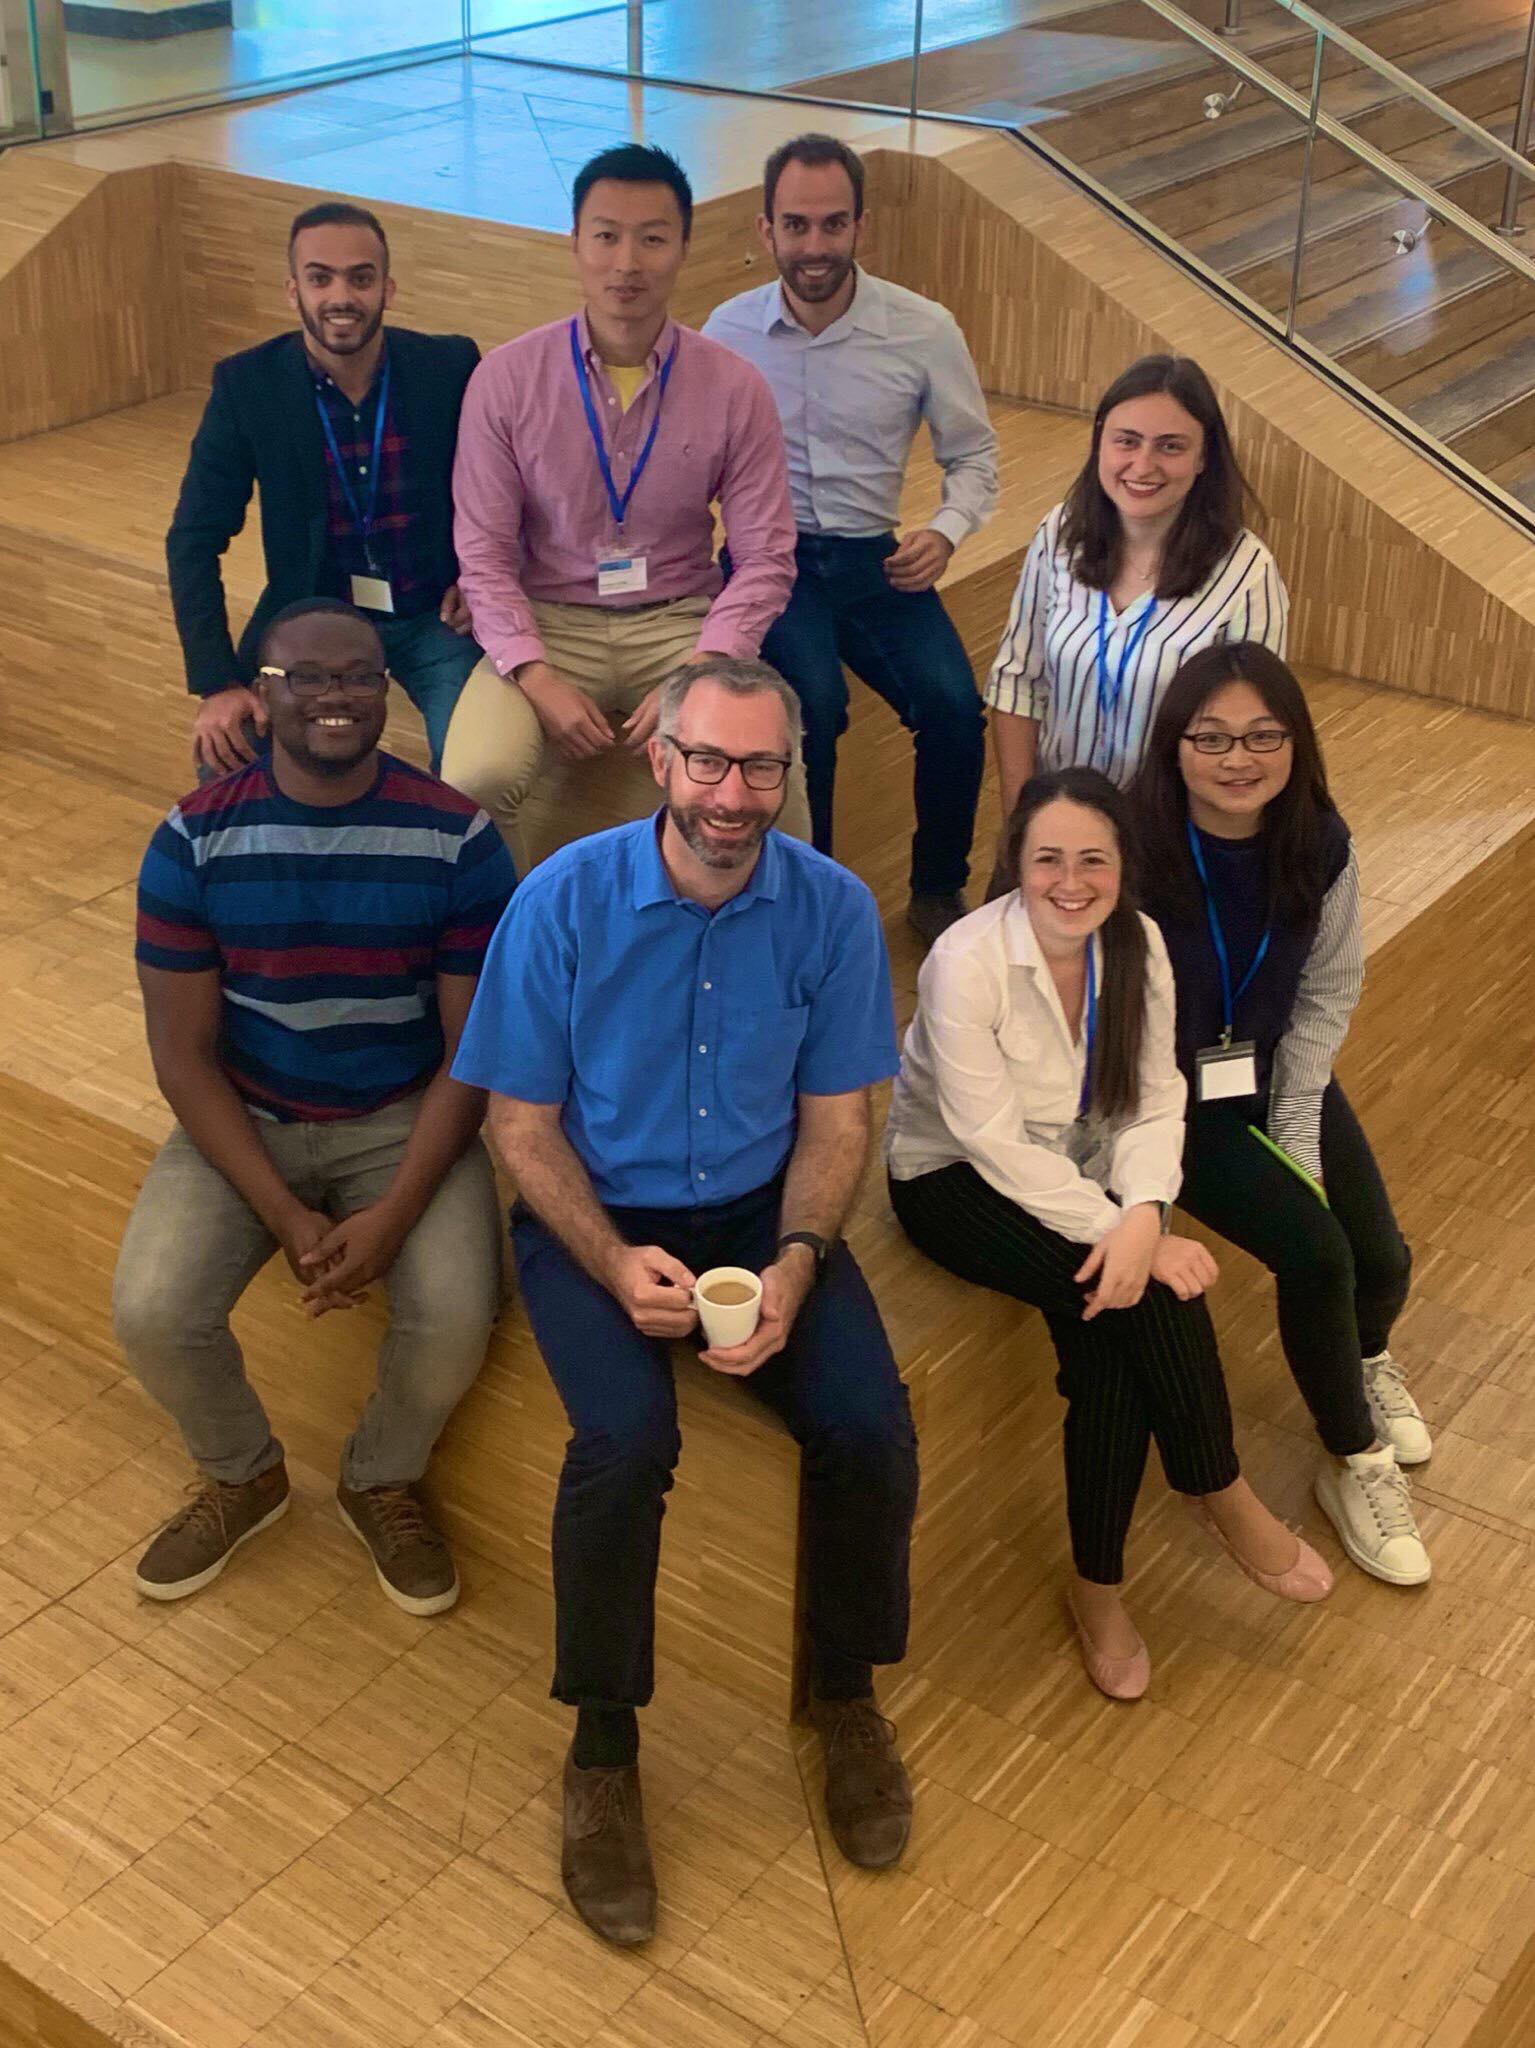 The latest version of the TAG photo taken at PSSRC2019. Mohammed, Ray, Adam, Johanna, Prince, Axel, Talia, and Qi.